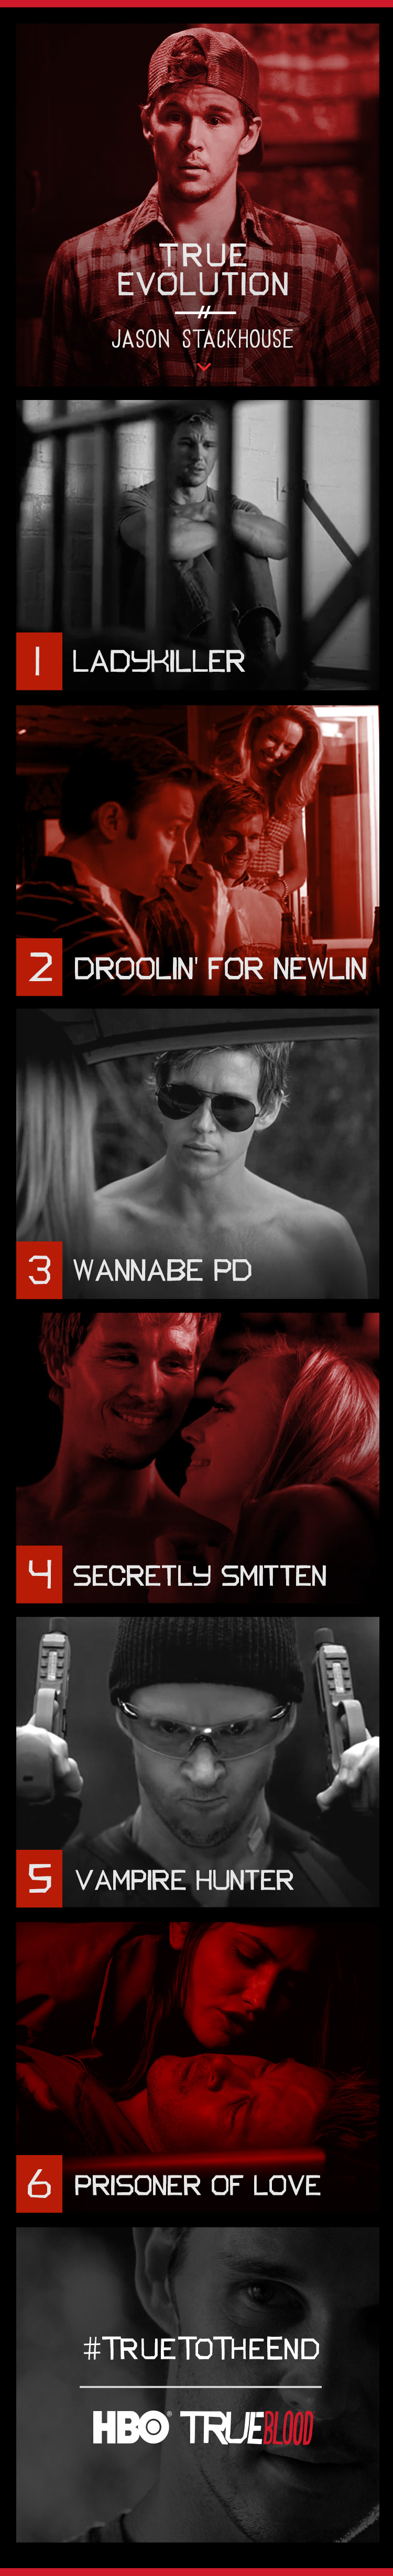 Jason Stackhouse, as played by Ryan Kwanten, on True Blood.